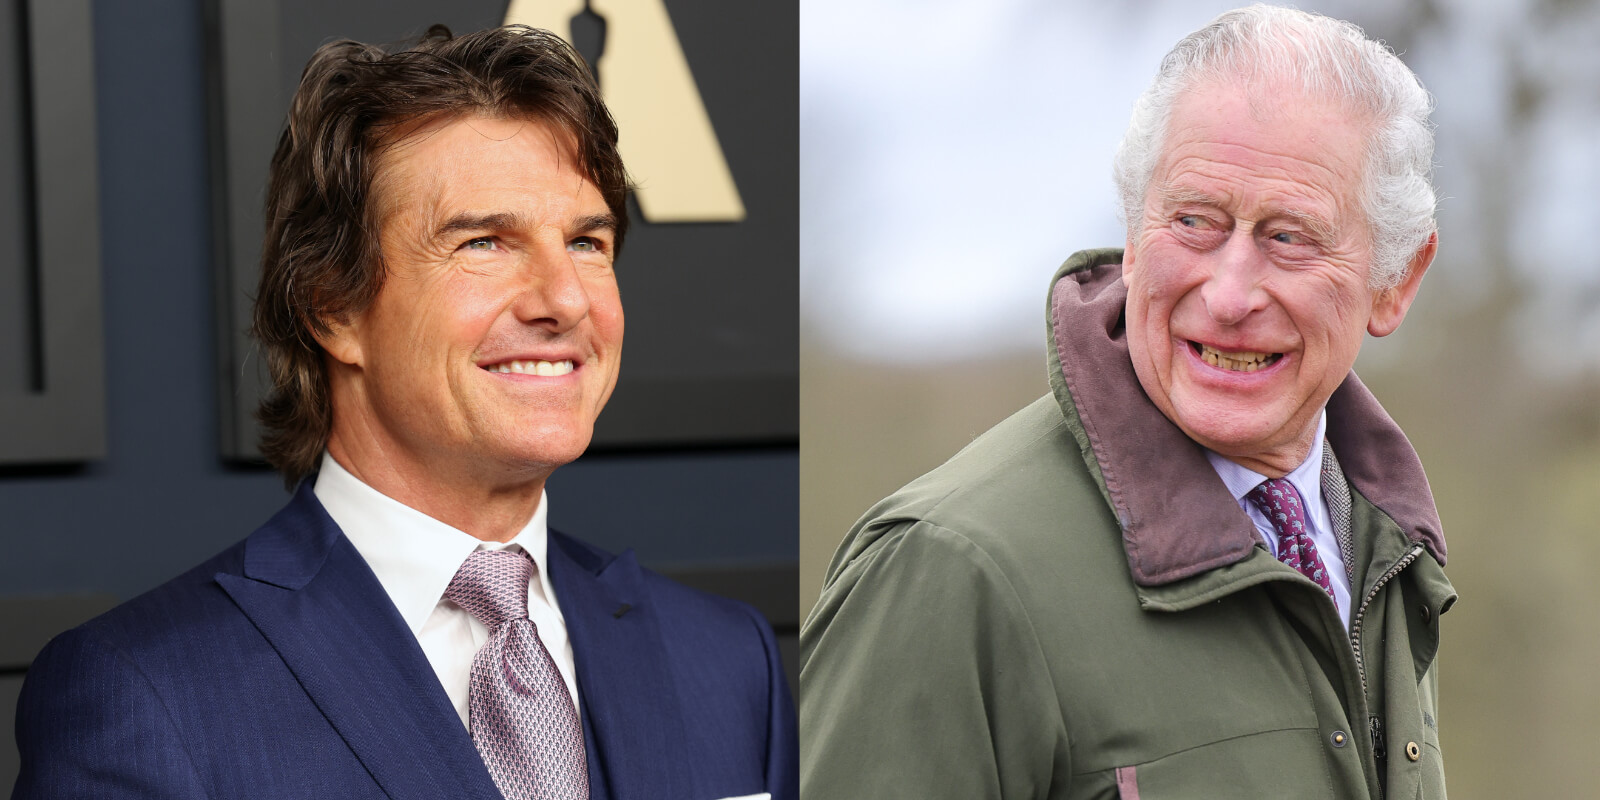 Tom Cruise and King Charles III in side by side photos, the actor will reportedly attend the king's coronation.